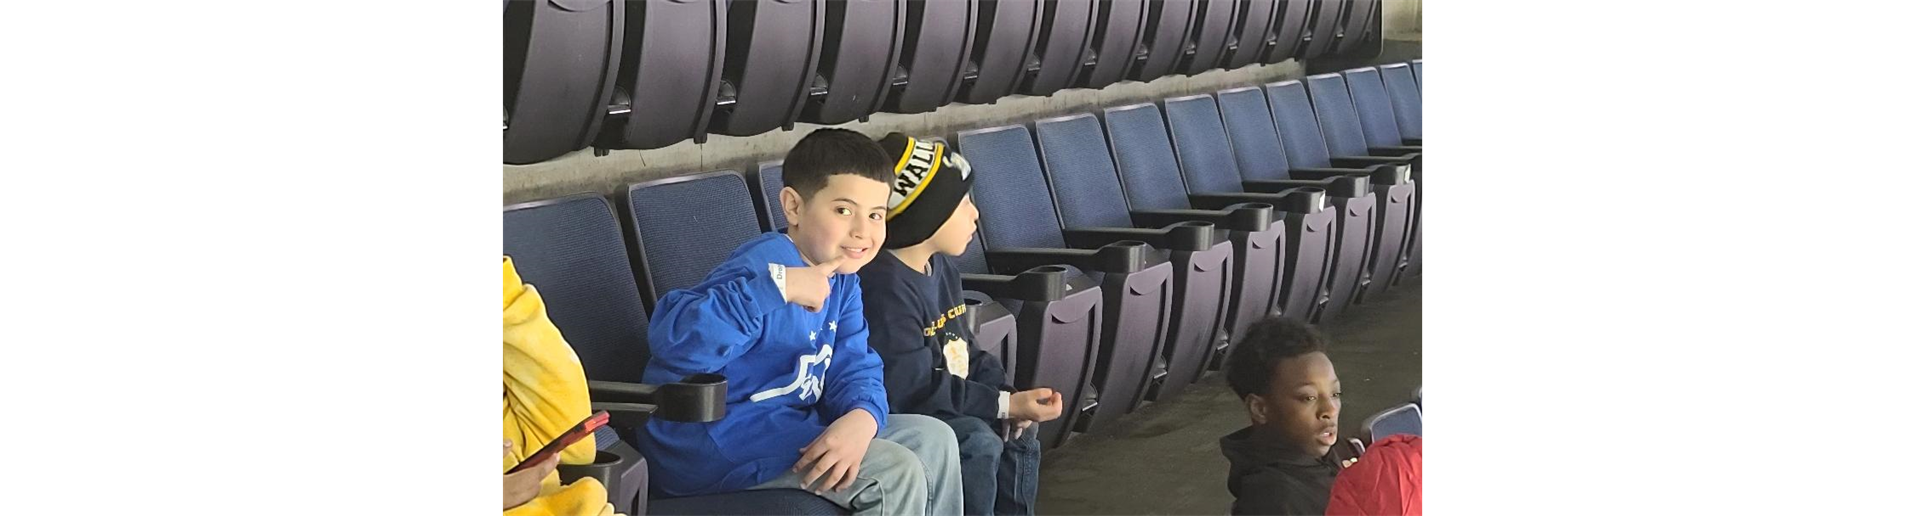 PAL Youth Enjoy an Exciting Walleye Game